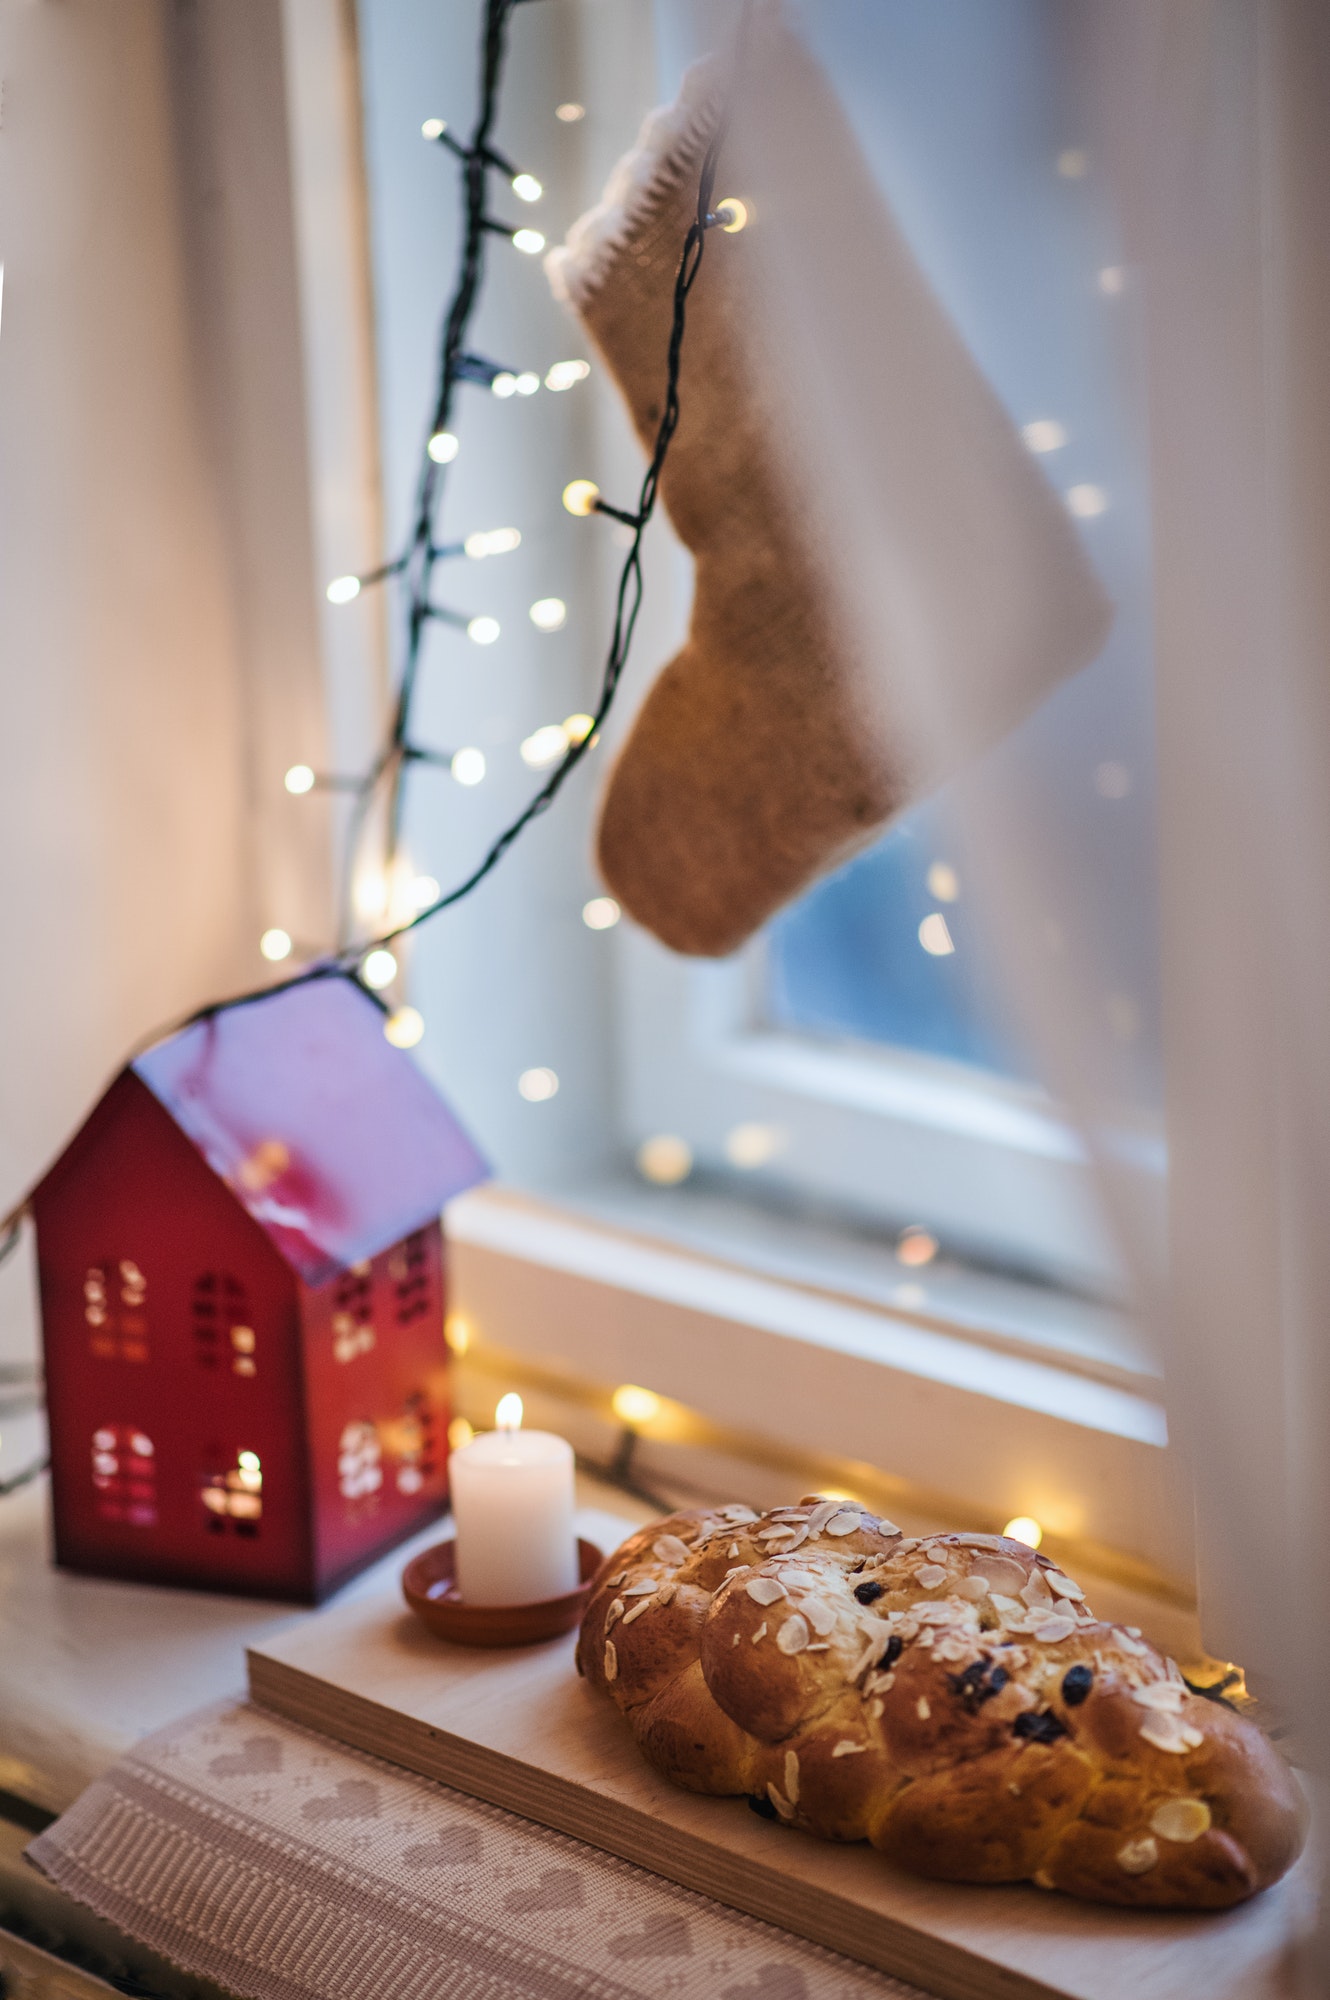 Composition of Christmas decorations indoors on window sill